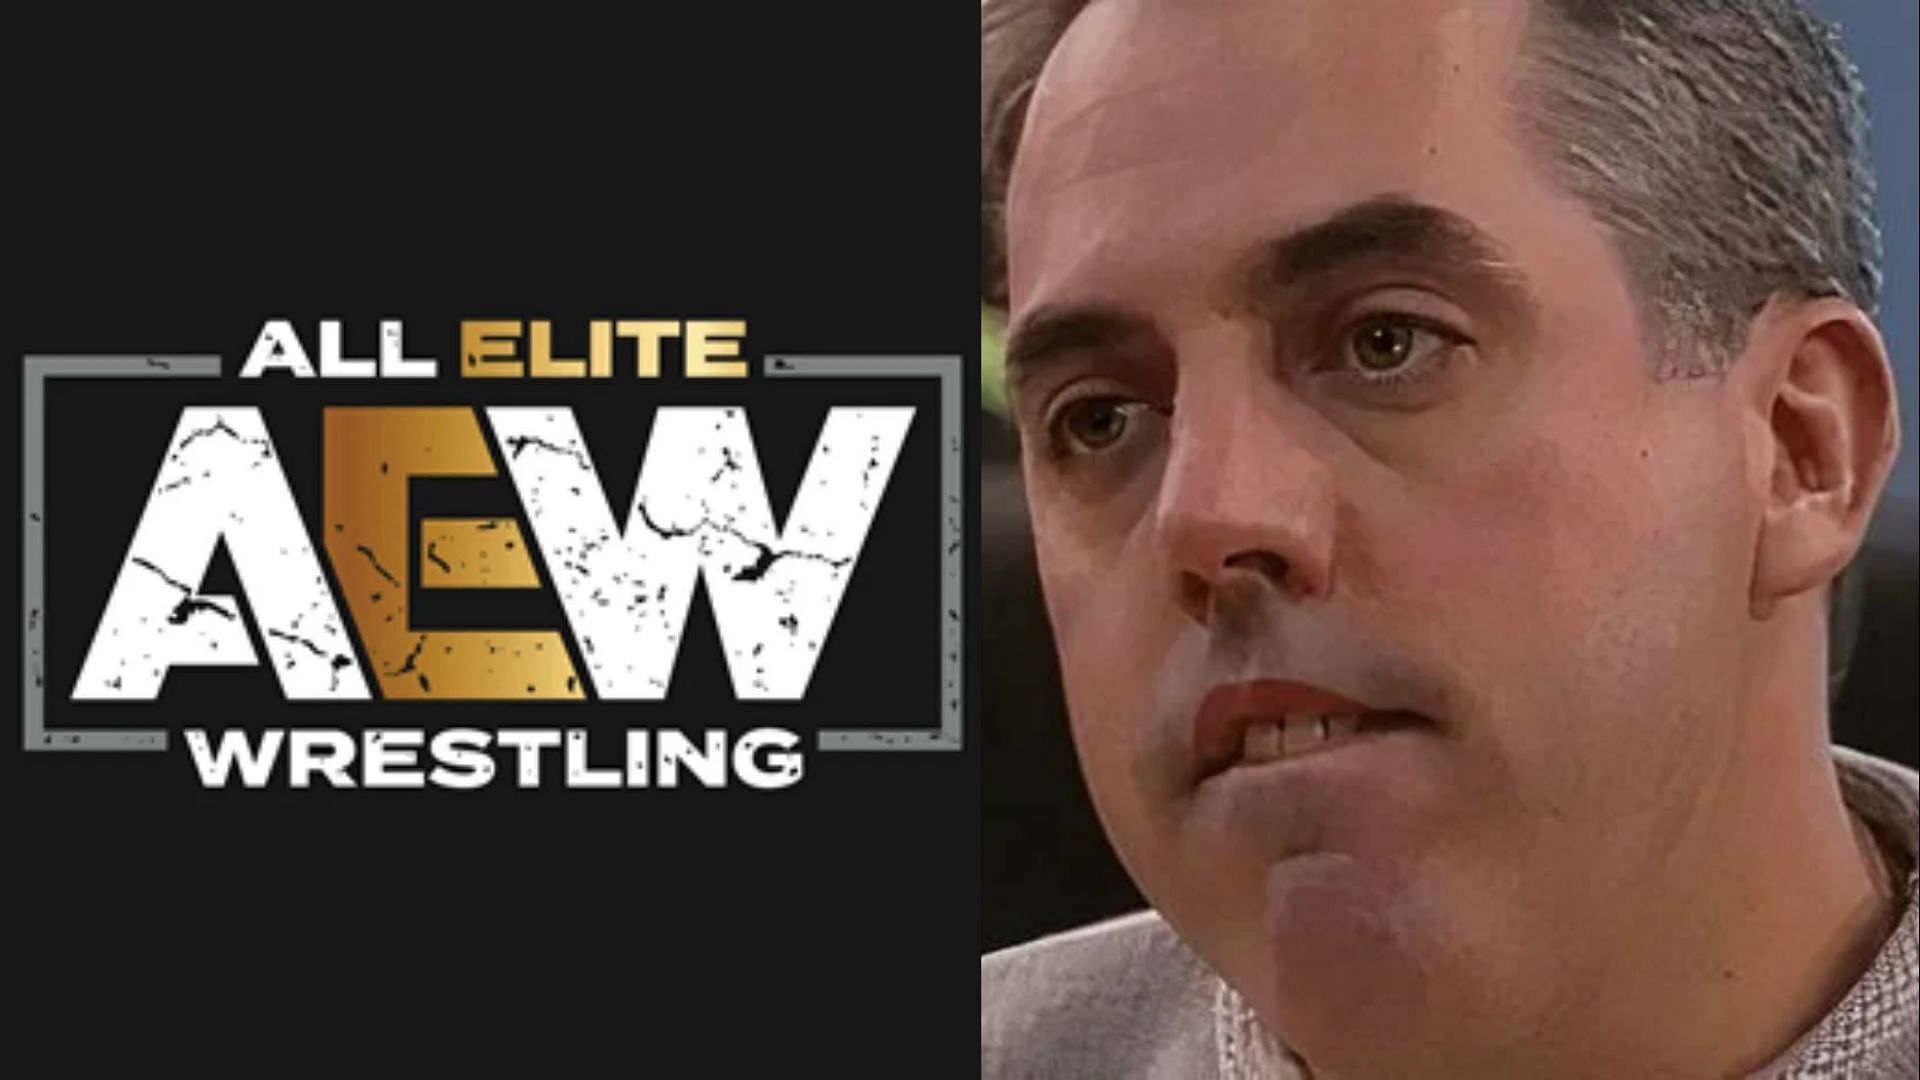 Kevin Dunn plays an important role behind the scenes in WWE